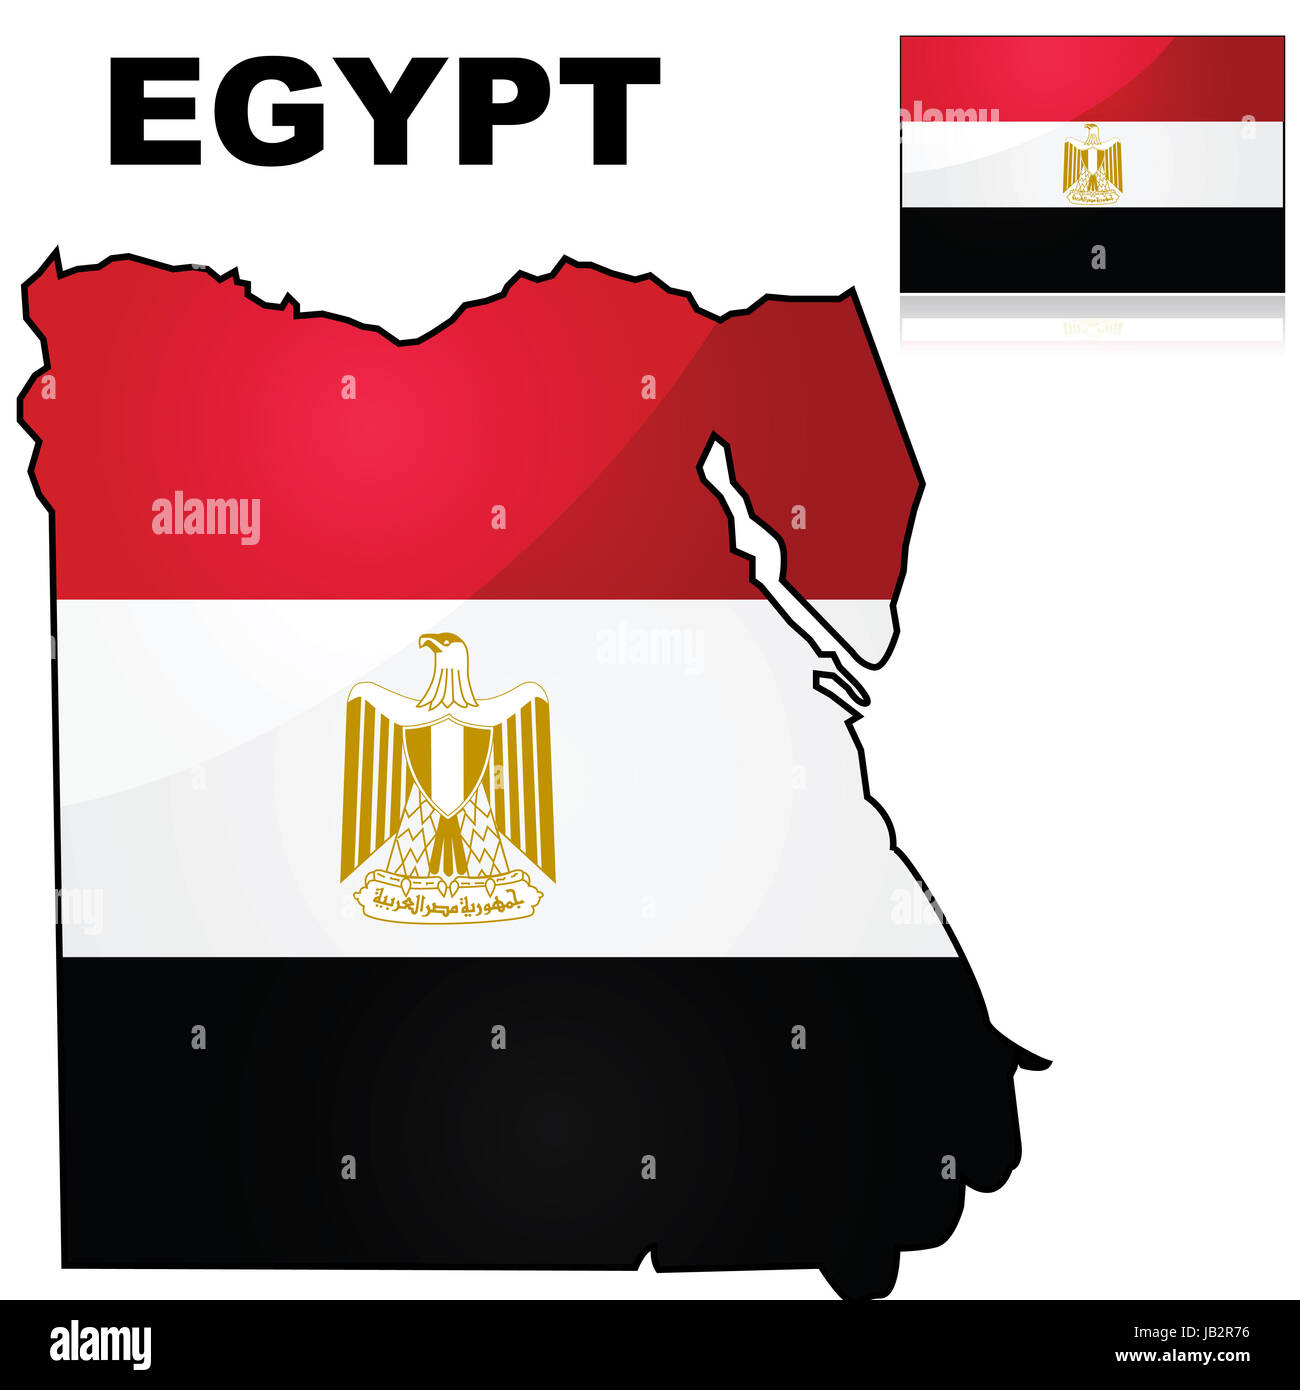 Glossy illustration showing the flag of Egypt over the country's map Stock Photo